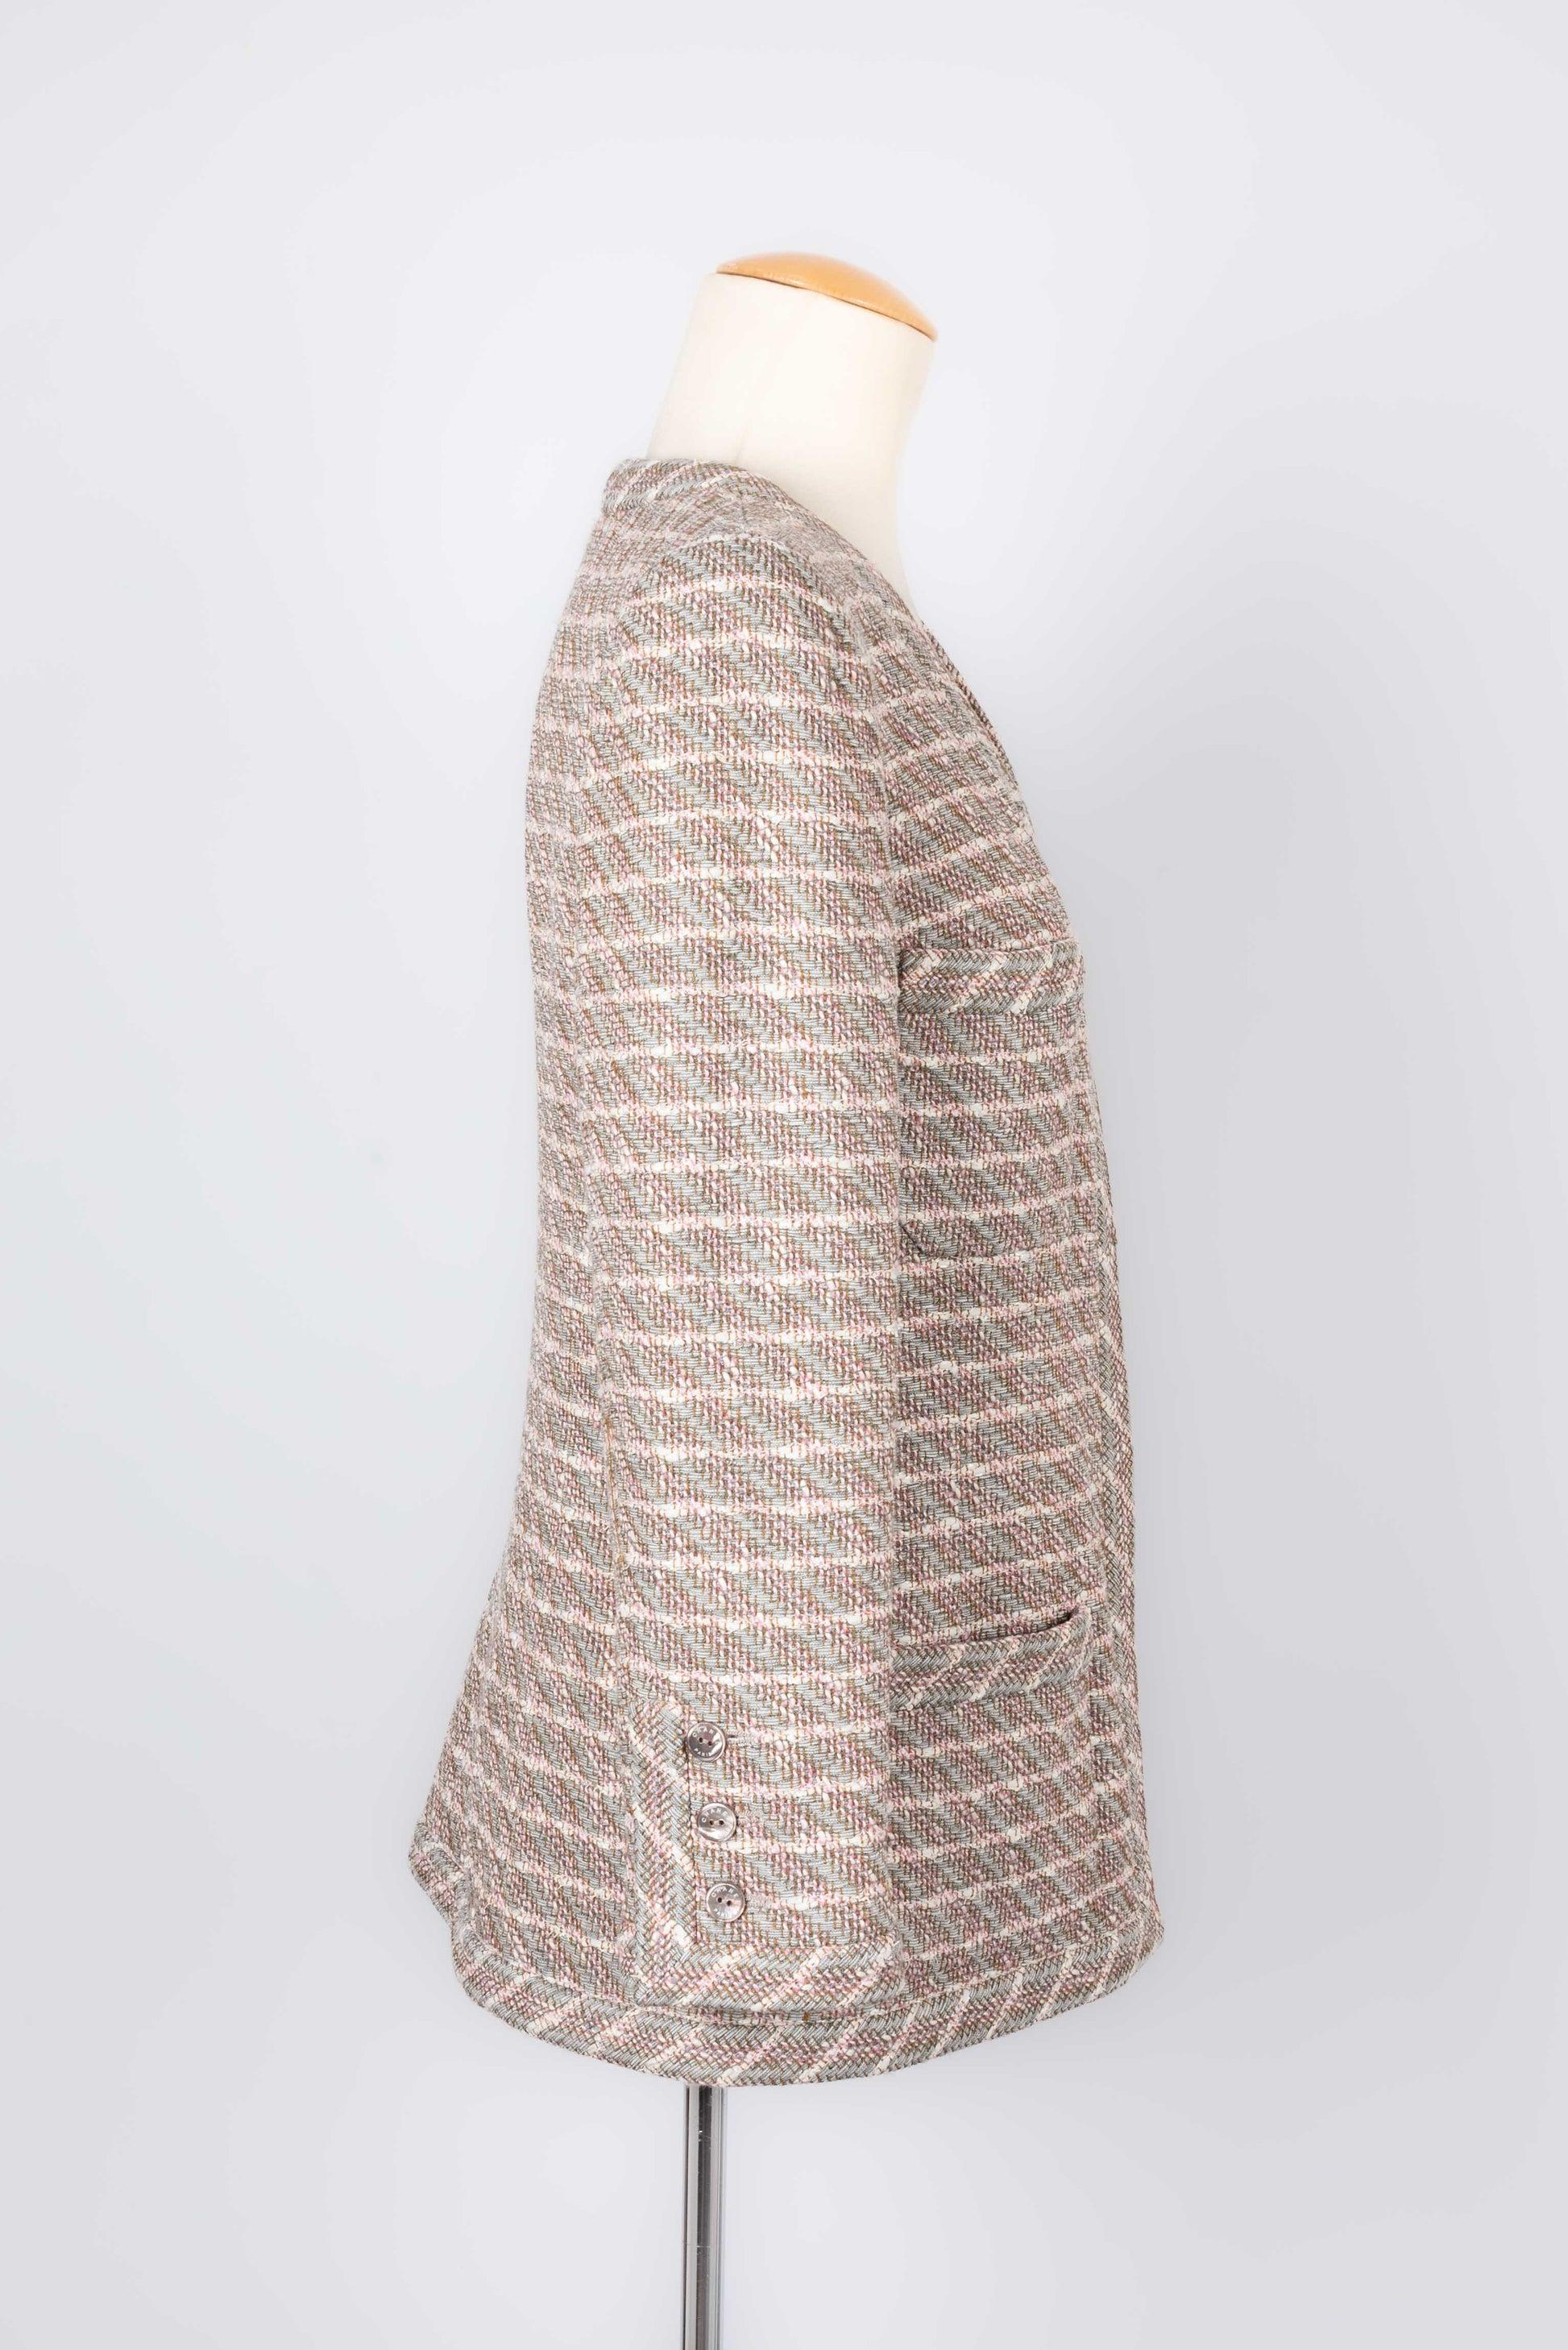 Women's Chanel Tweed Jacket with Silk Lining, 2003 For Sale